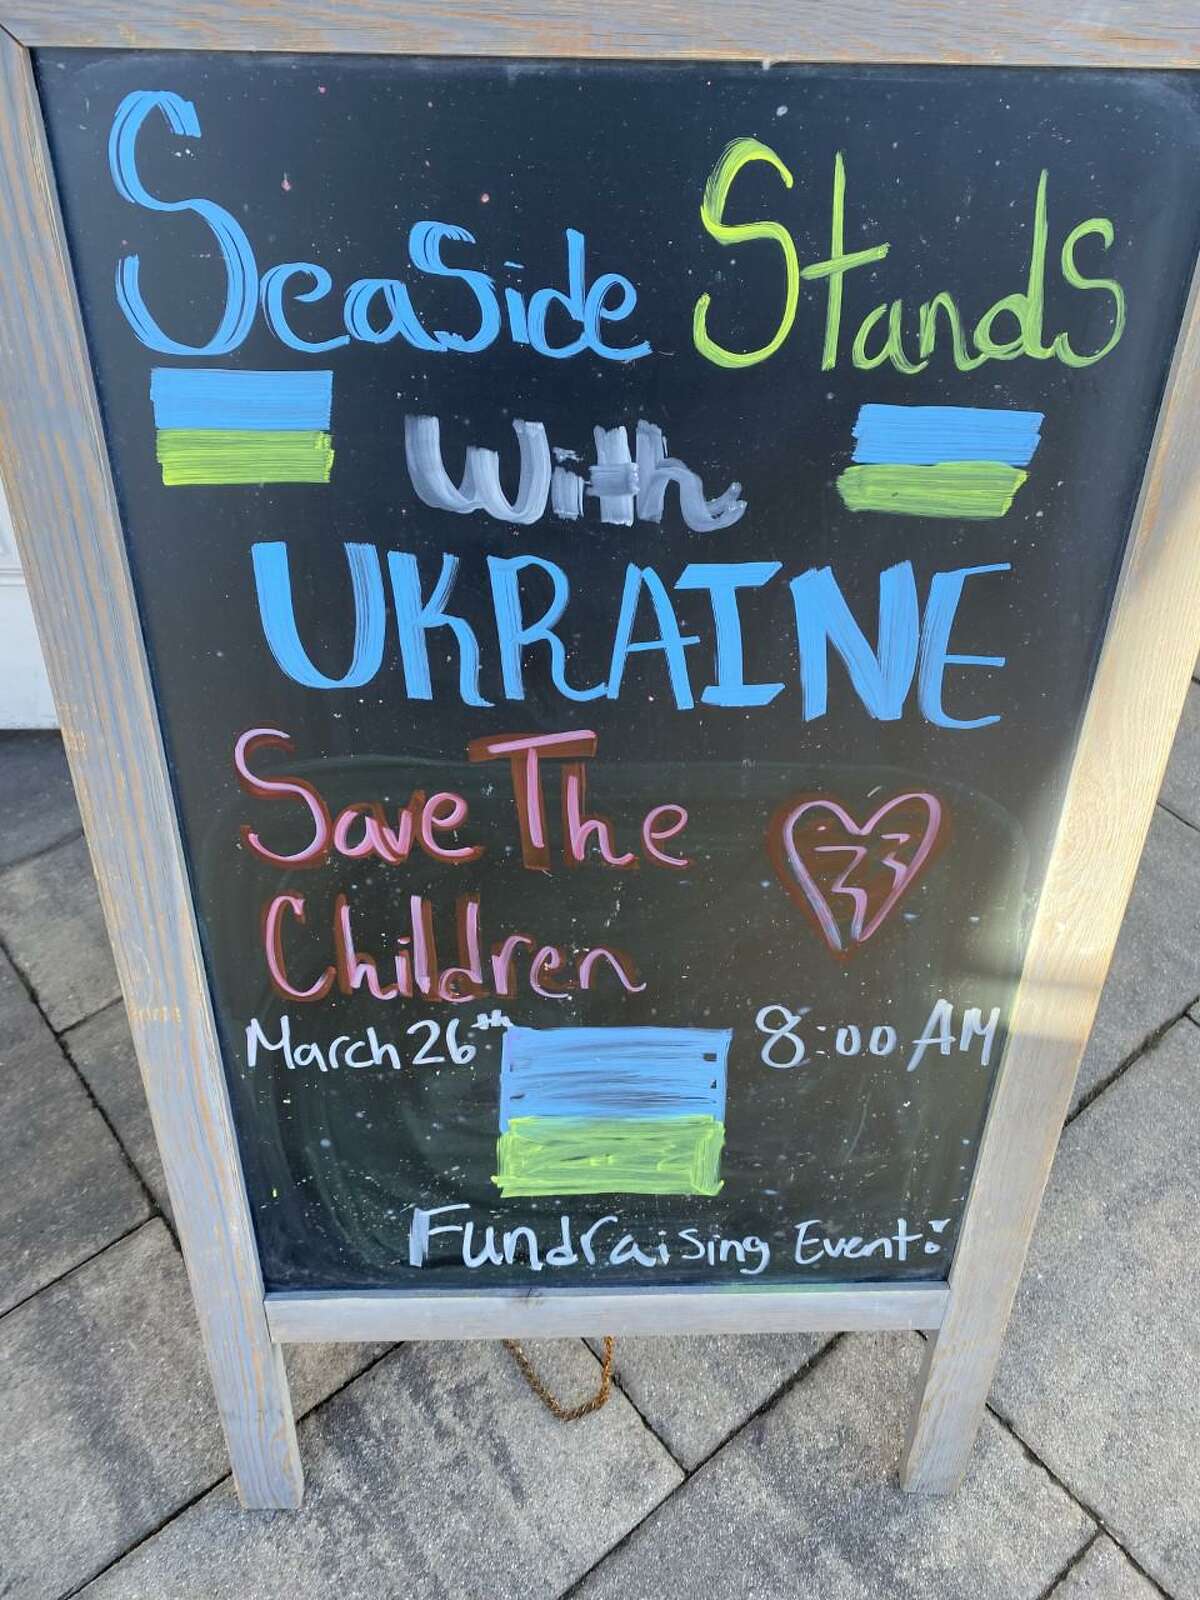 Nina Ortiz, owner of Seaside Nutrition, is putting together a benefit event, Seaside Stands with Ukraine, for Saturday, March 26, 2022, from 8 to 4 at her Naugatuck Avenue location.